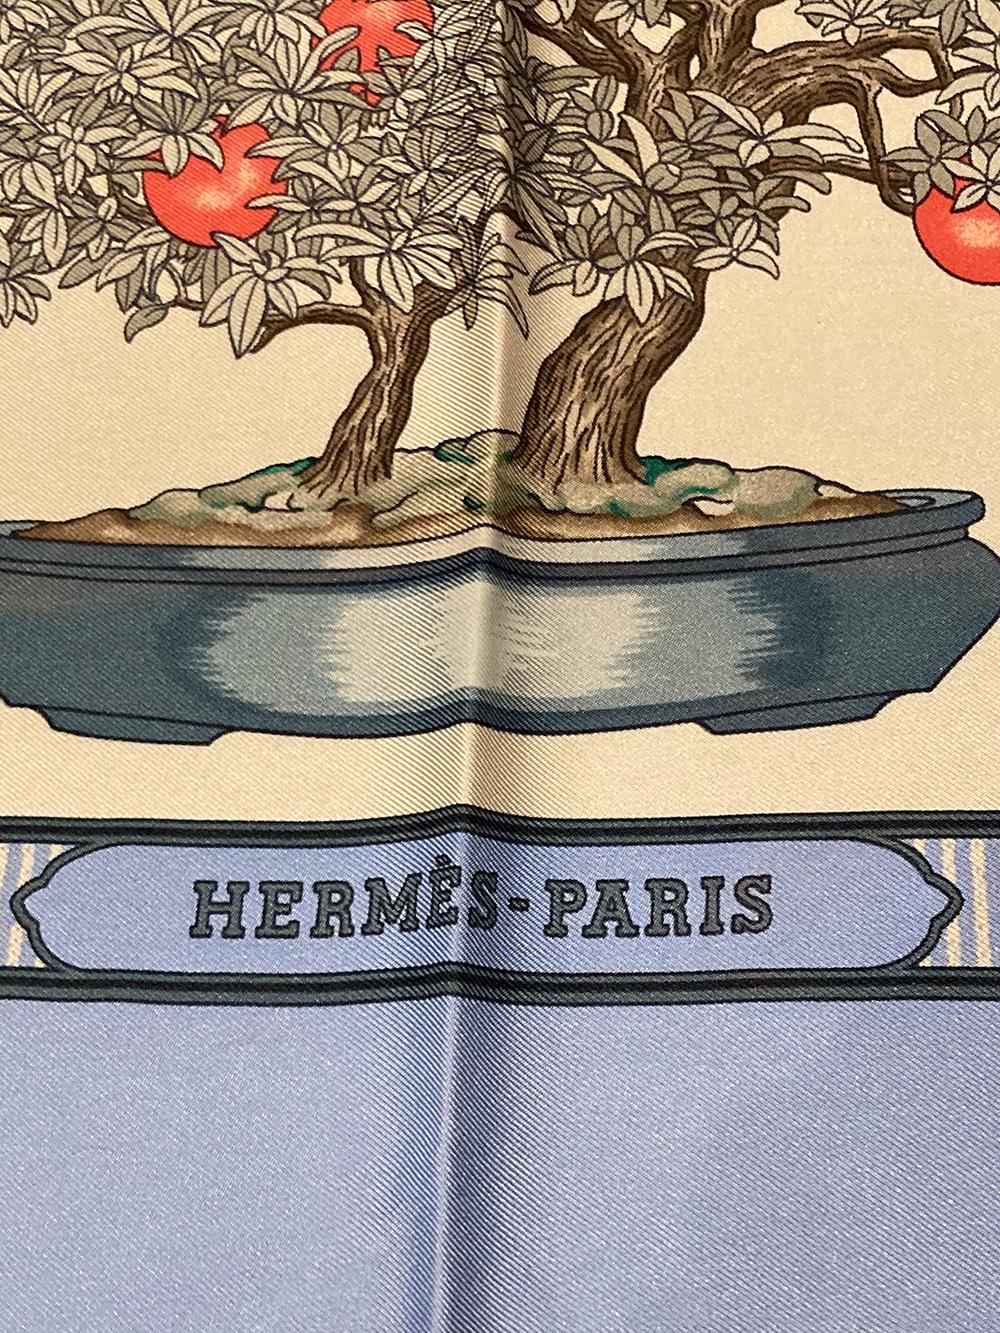 Vintage Hermes Bonsai Silk Scarf in excellent condition. Original silk screen design c1991 by Catherine Baschet features an array of ornate bonsai trees with black and gray illustrated leaves and details and red, orange, coral and green foliage,